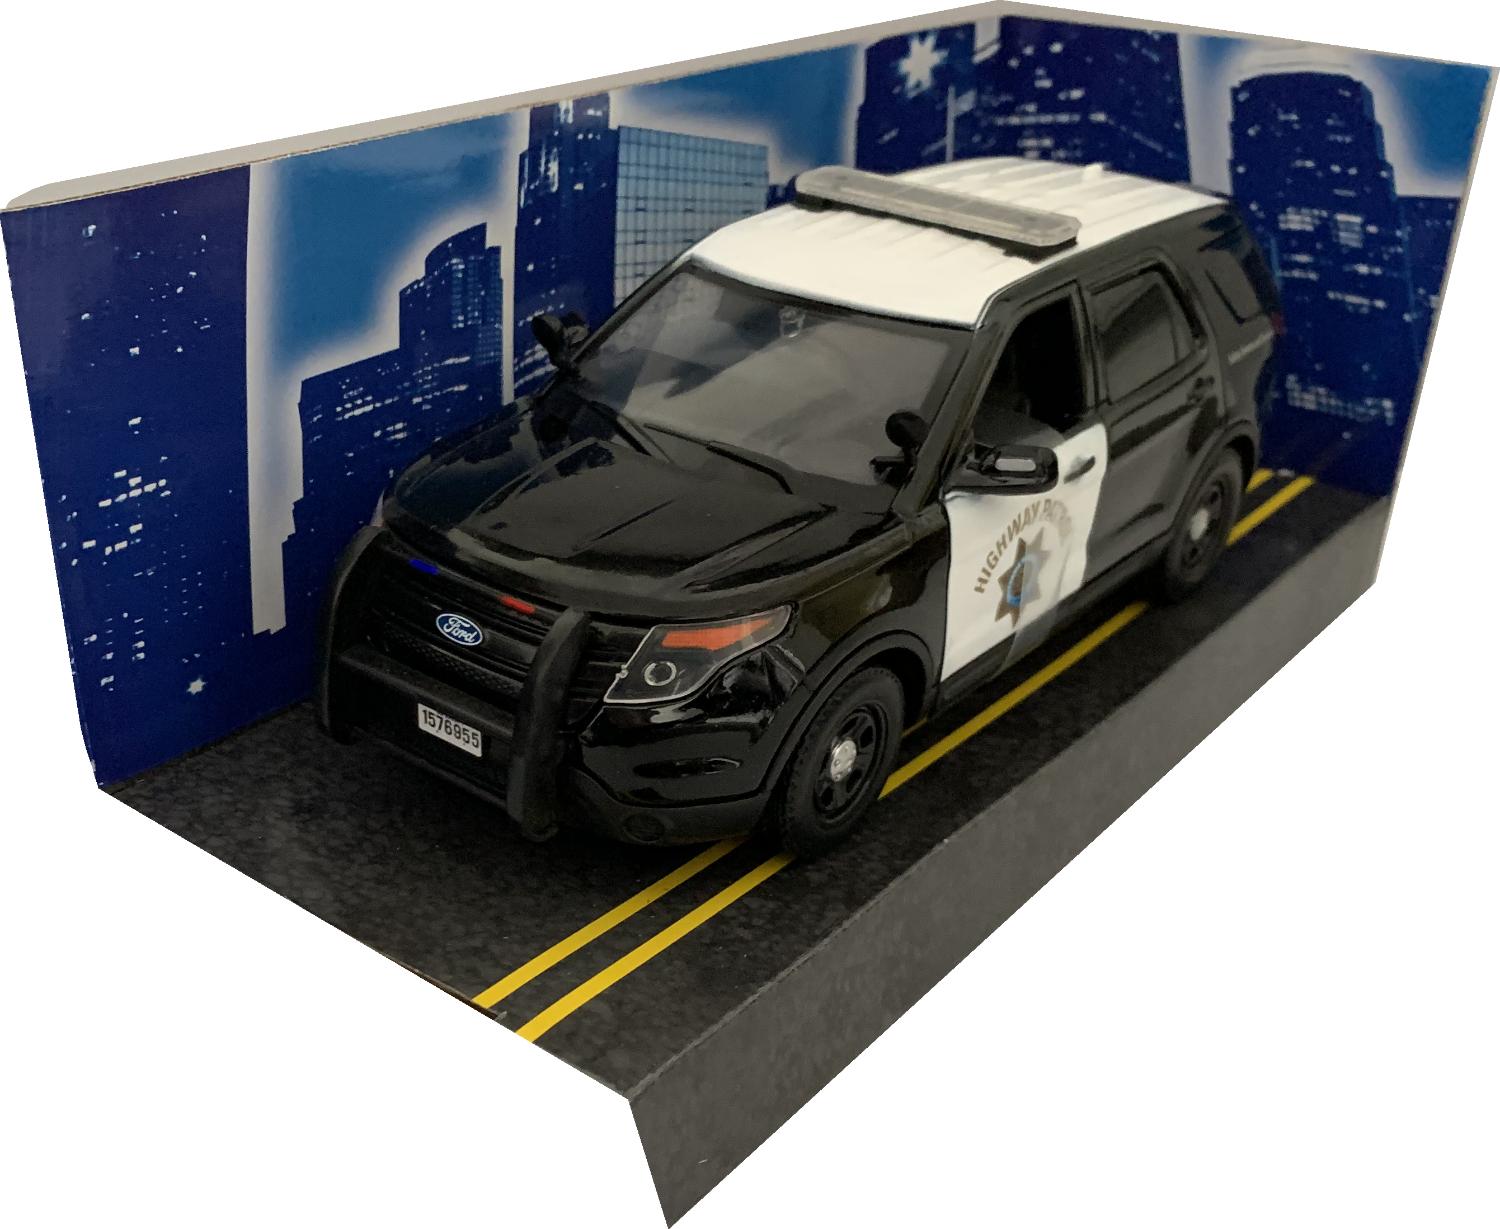 Ford Police Interceptor Utility California Highway Patrol 2015 in black / white 1:24 scale model from Motormax ,MMX76955